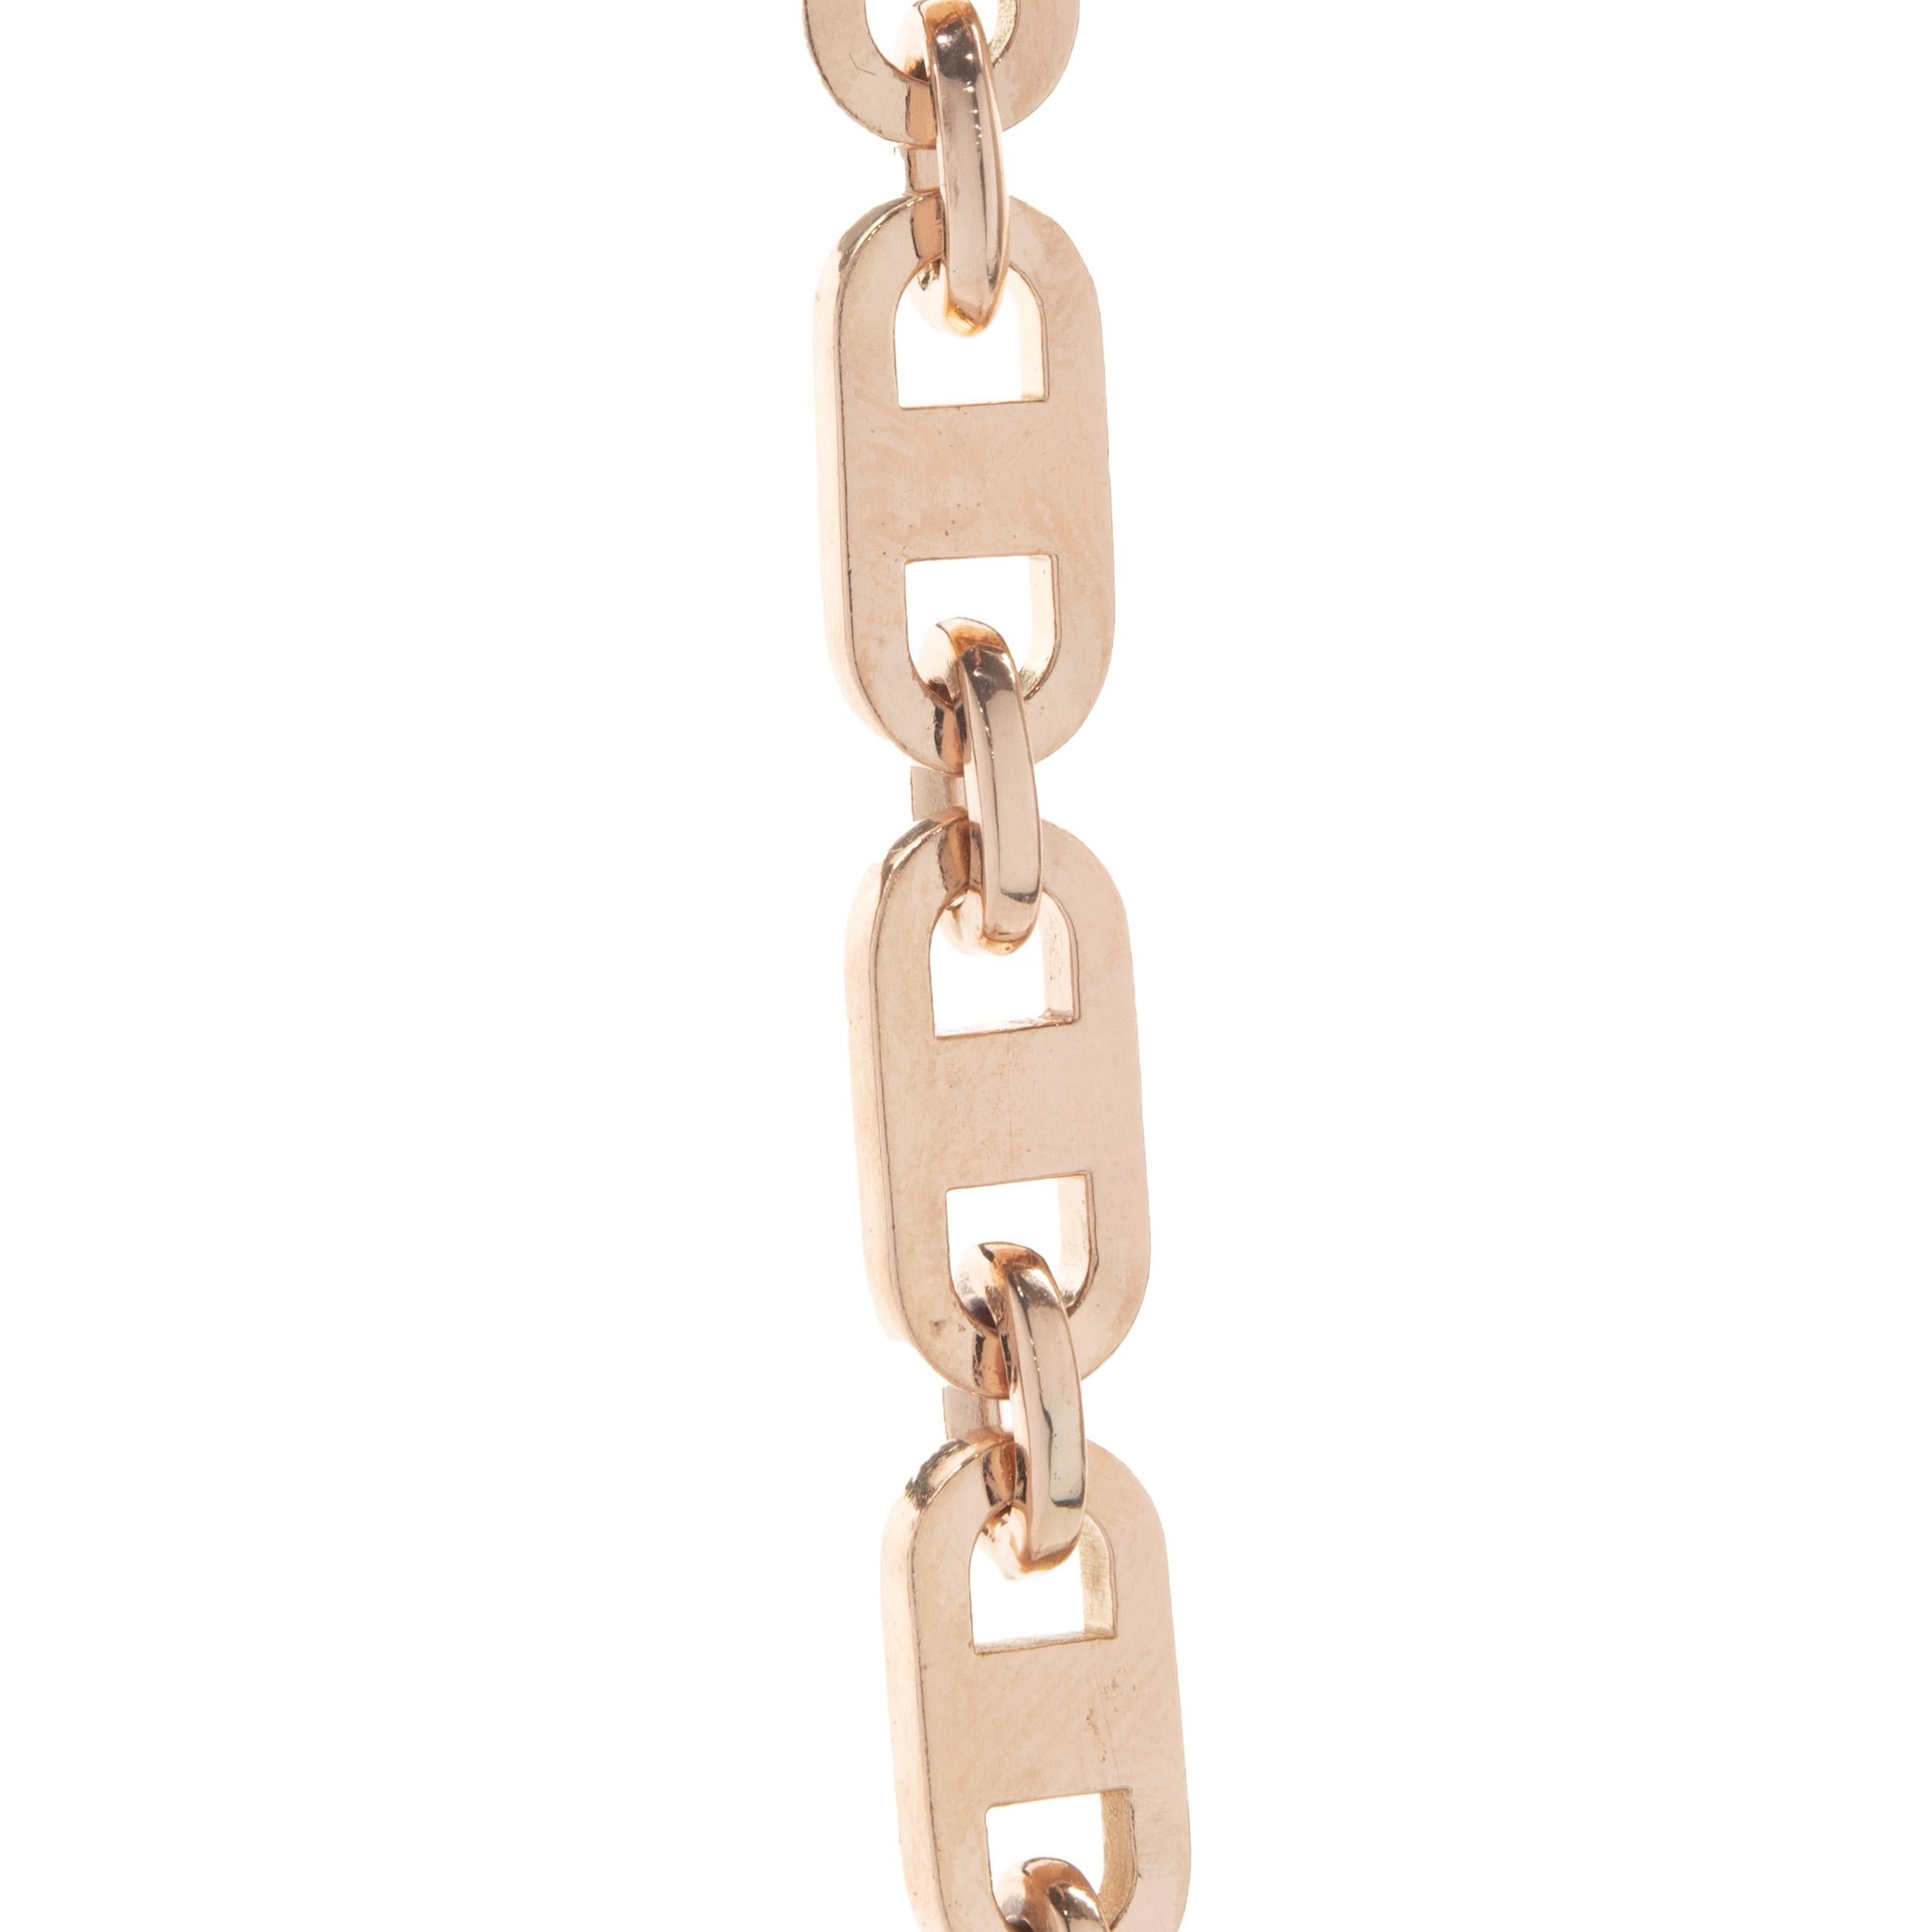 Material: 14K rose gold
Dimensions: bracelet will fit up to an 6.5-inch wrist
Weight: 29.09 grams
